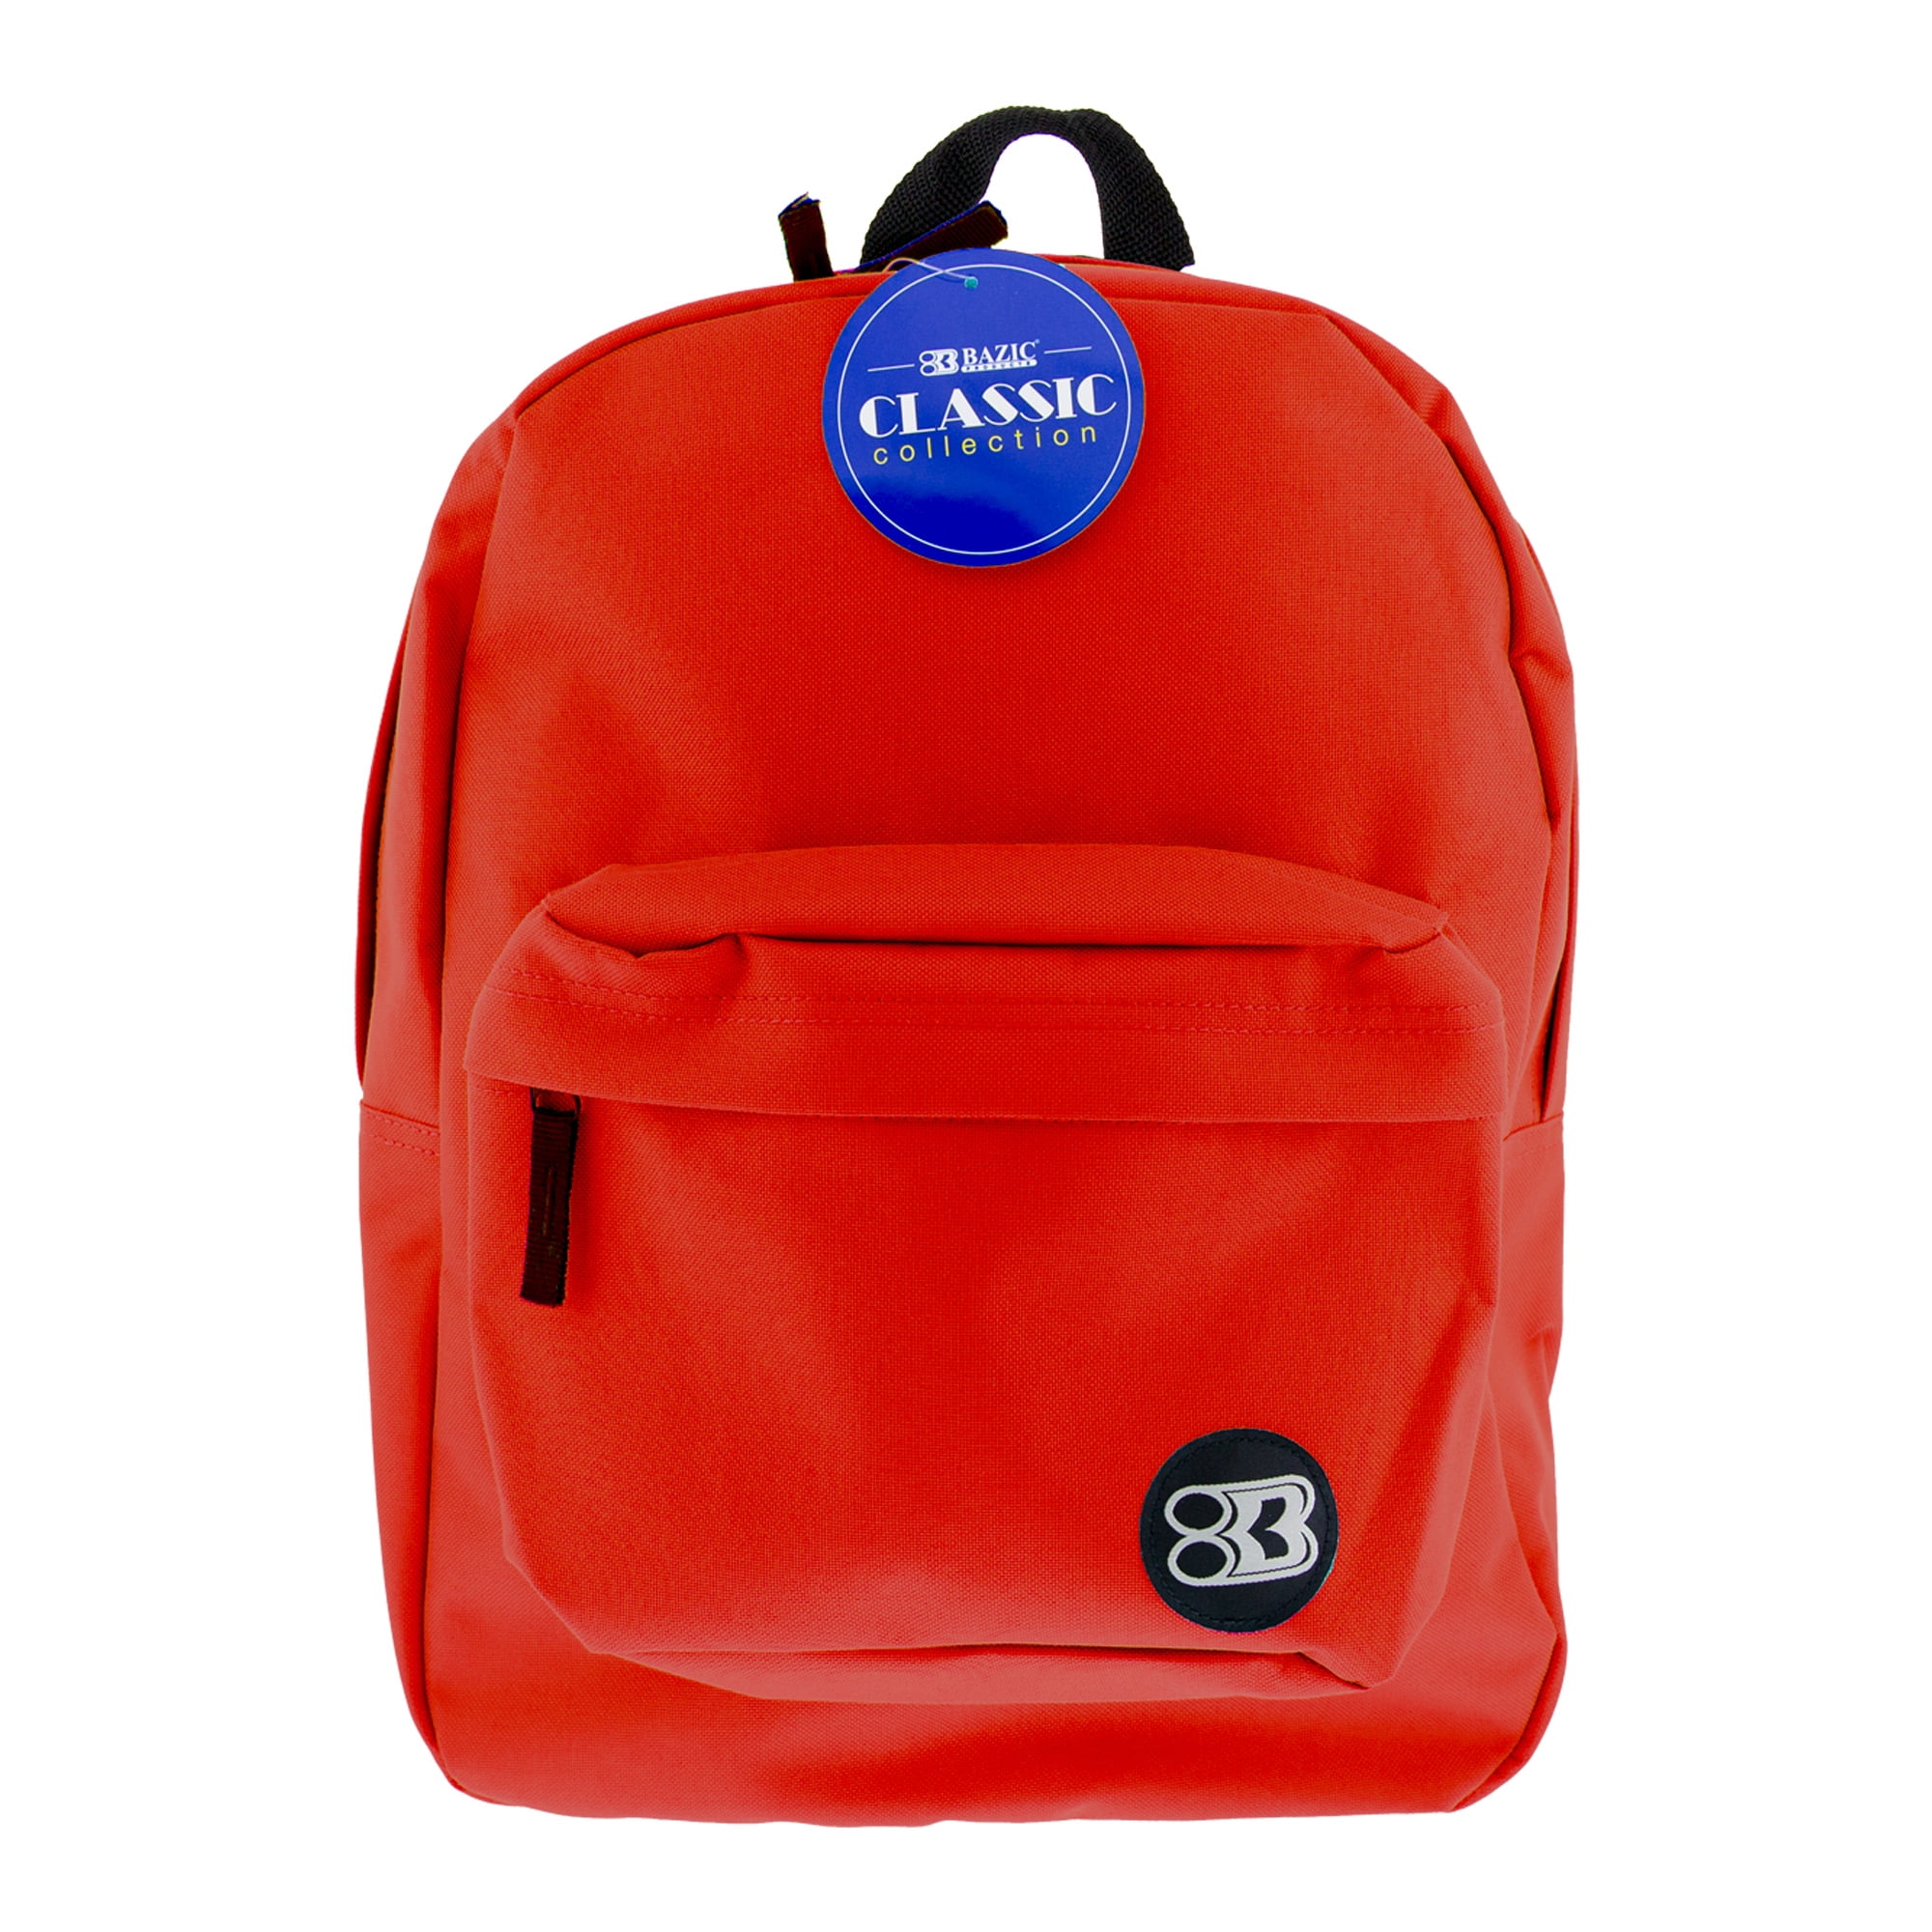 Backpack, travel and school bag size 16 inch , 2724960601234 price in Egypt  | Amazon Egypt | kanbkam